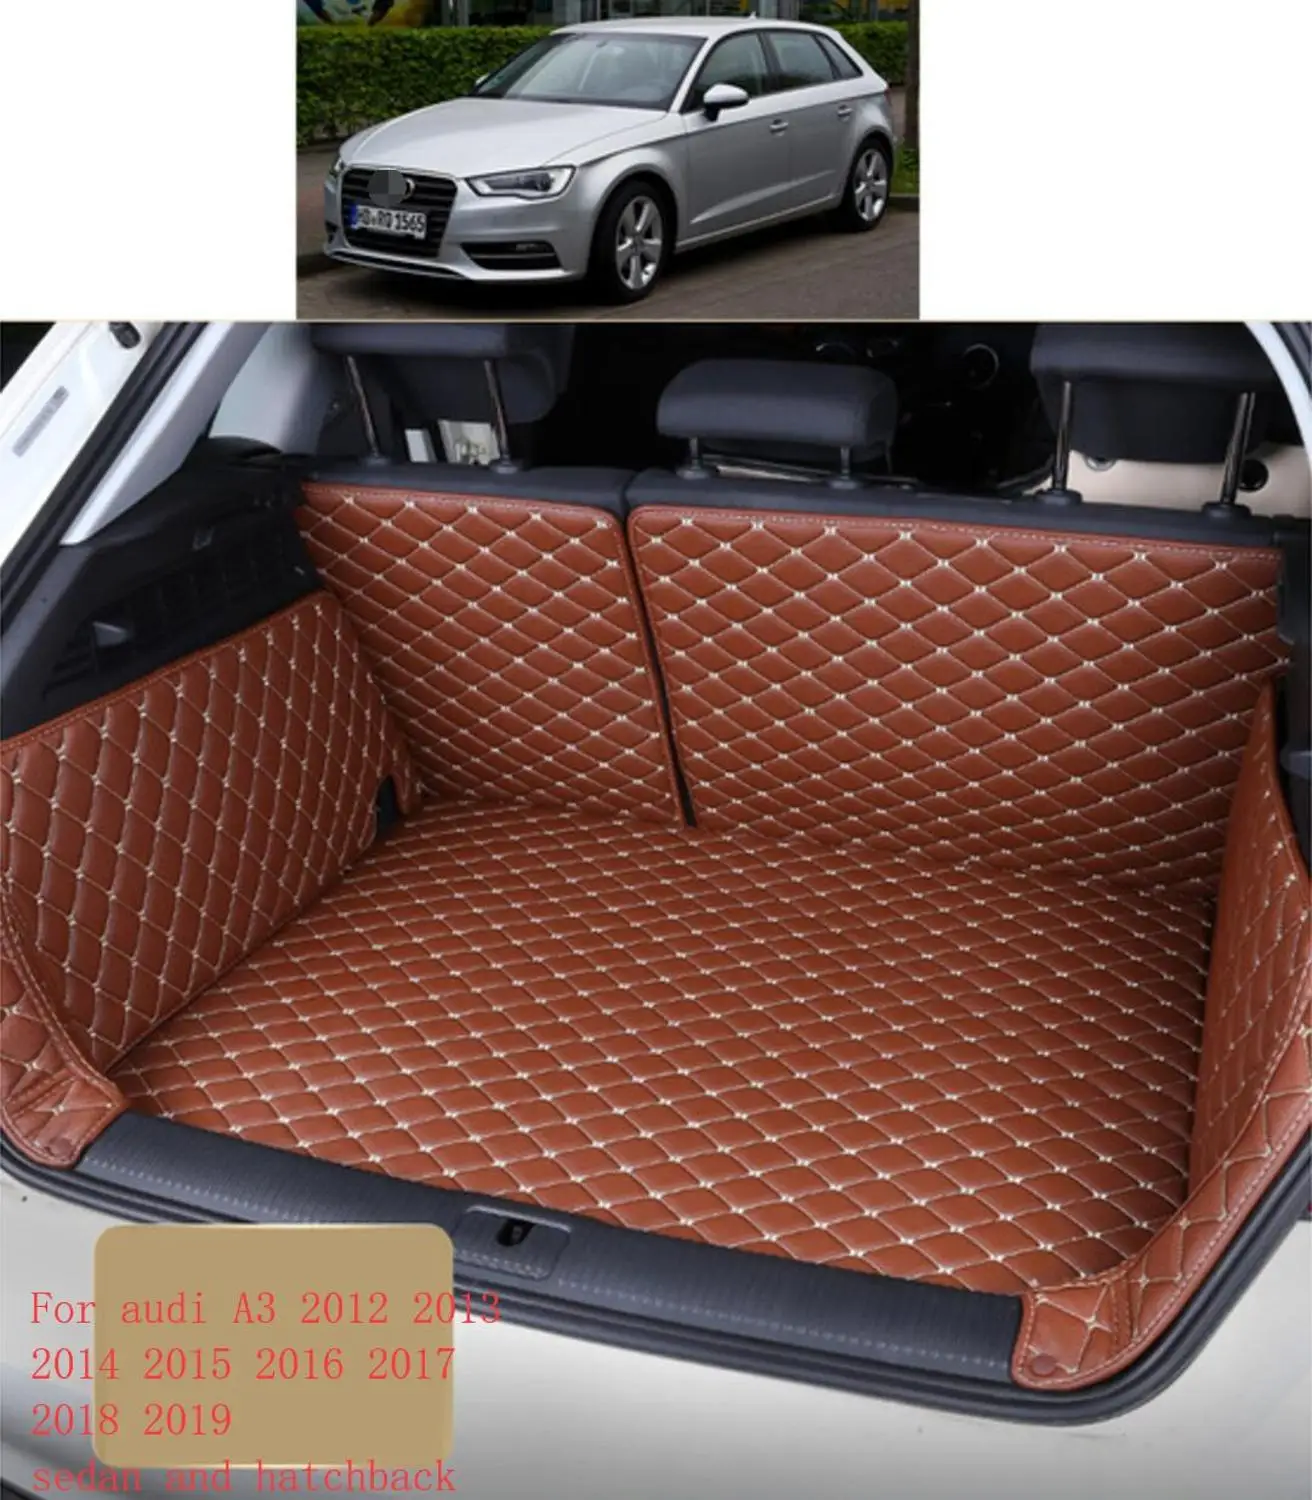 luxury fiber leather car trunk mat for audi a3 8V 2012 2013 2014 2015 2016 2017 2018 2019 car styling car accessories